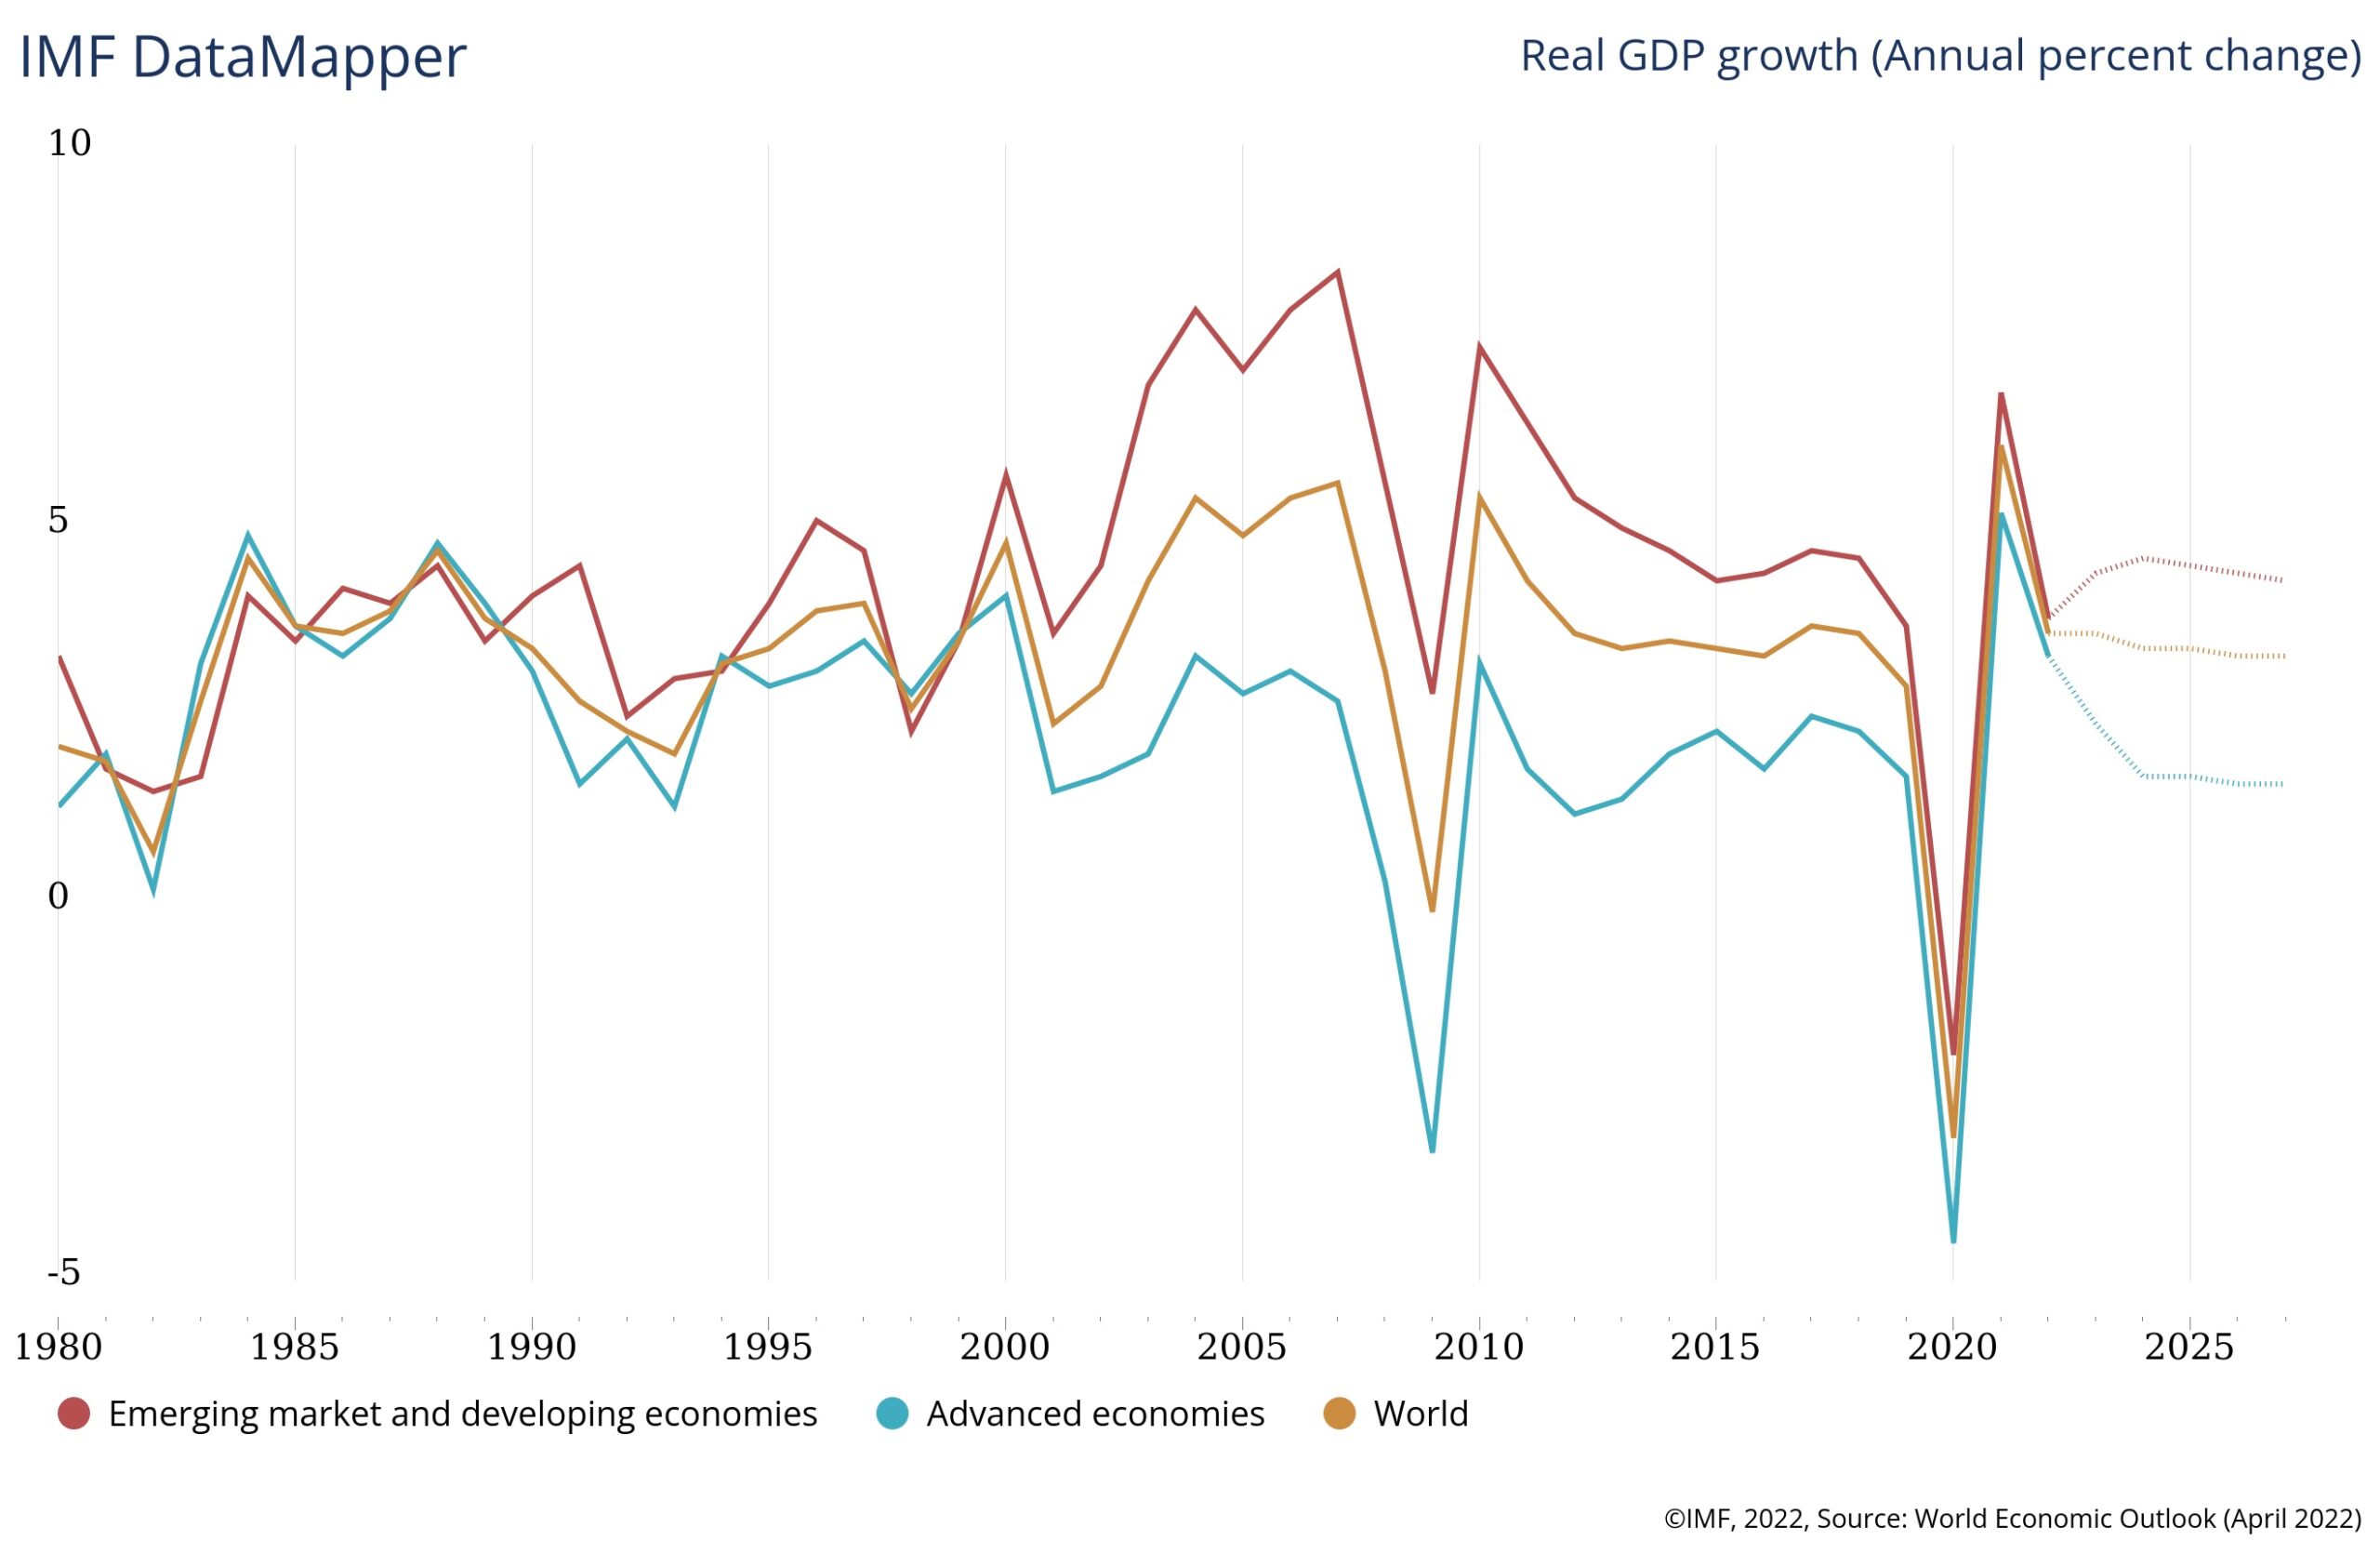 Real GDP growth comparision